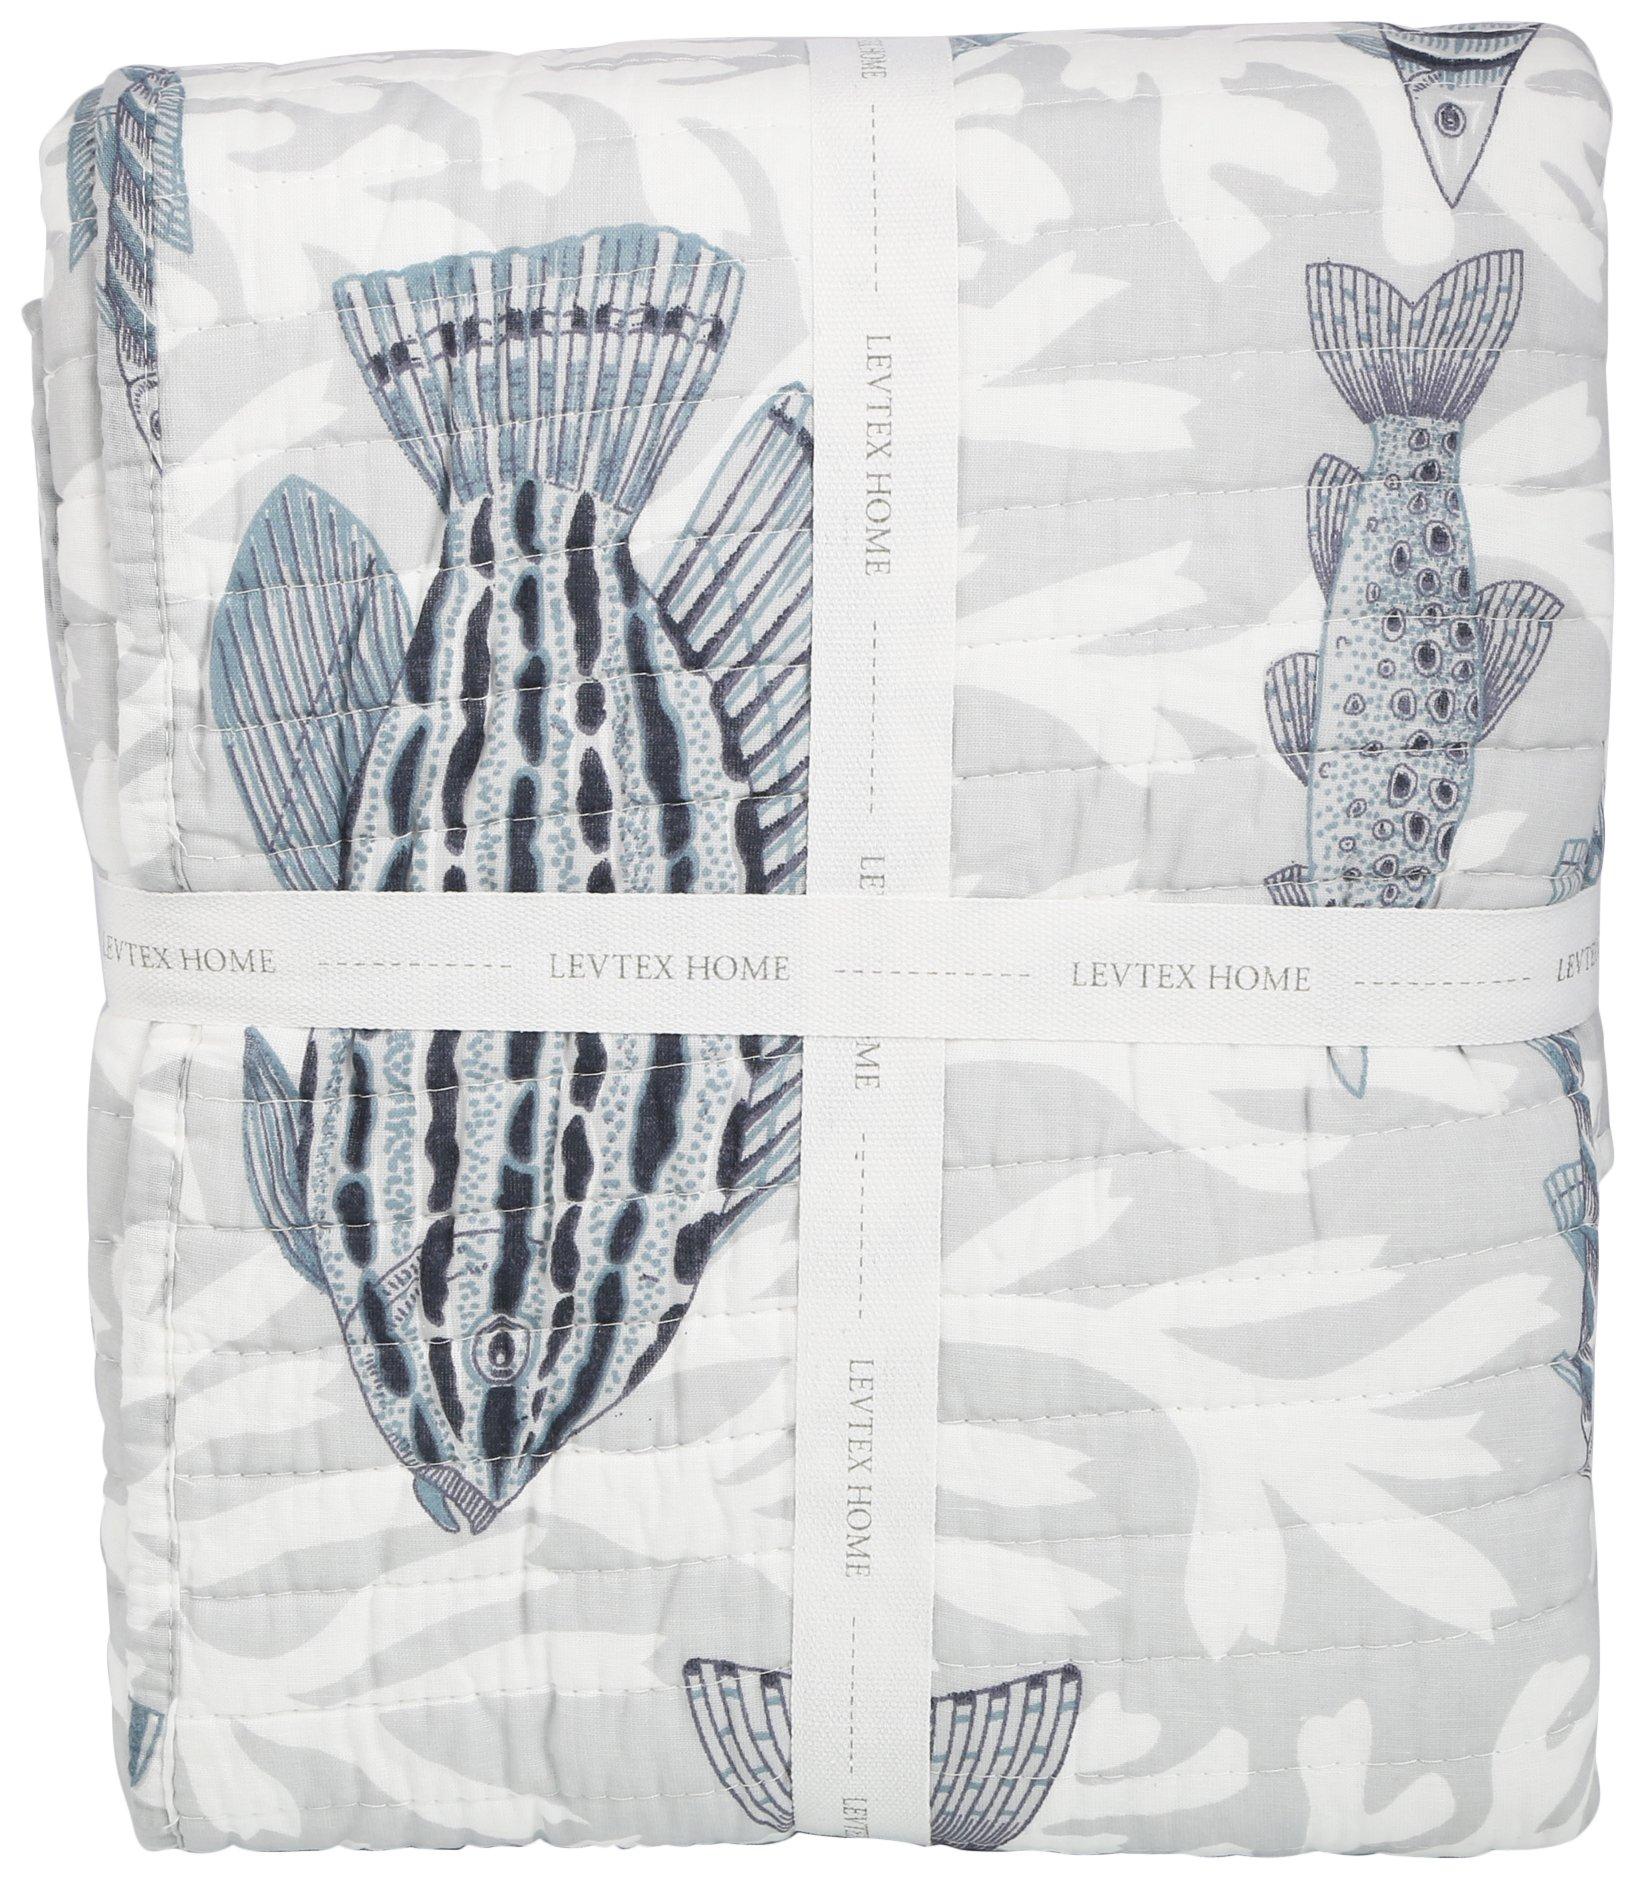 50x60 Fish Print Quilted Throw Blanket